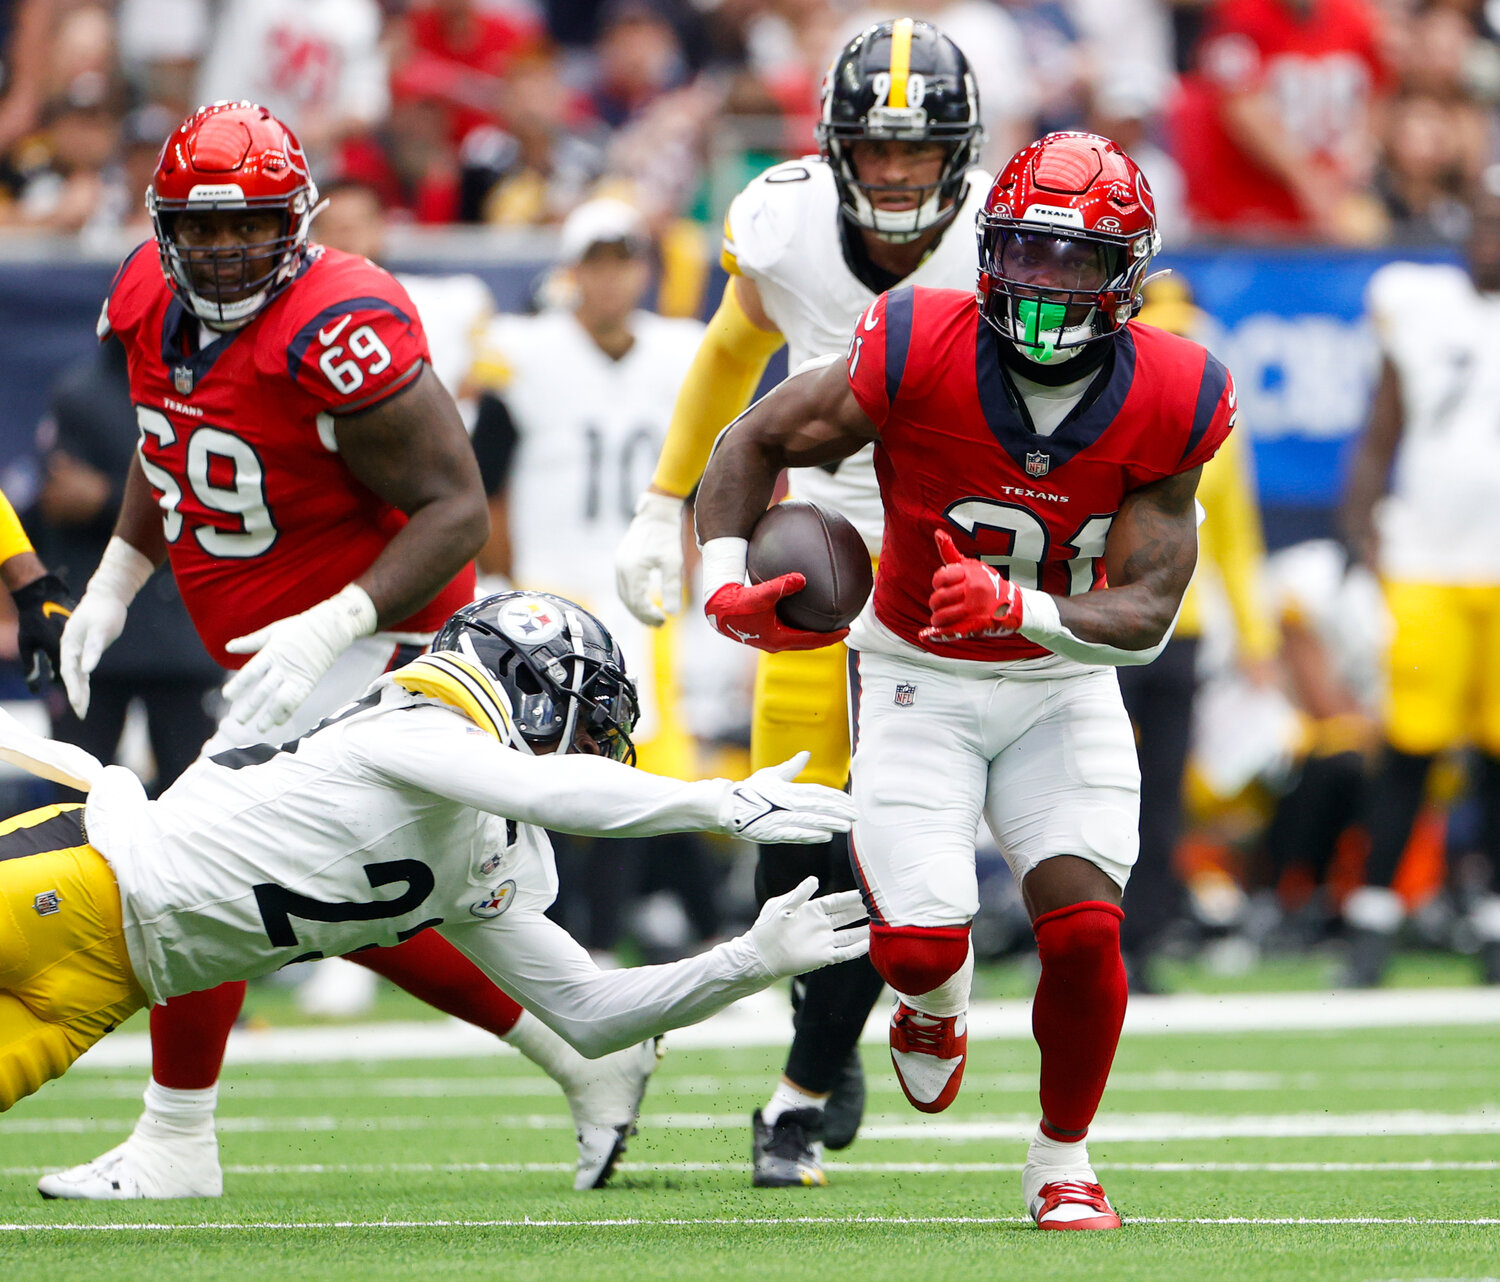 Texans running back Dameon Pierce (31) carries the ball past the outstretched arms of Steelers safety Damontae Kazee (23) during an NFL game on October 1, 2023 in Houston.